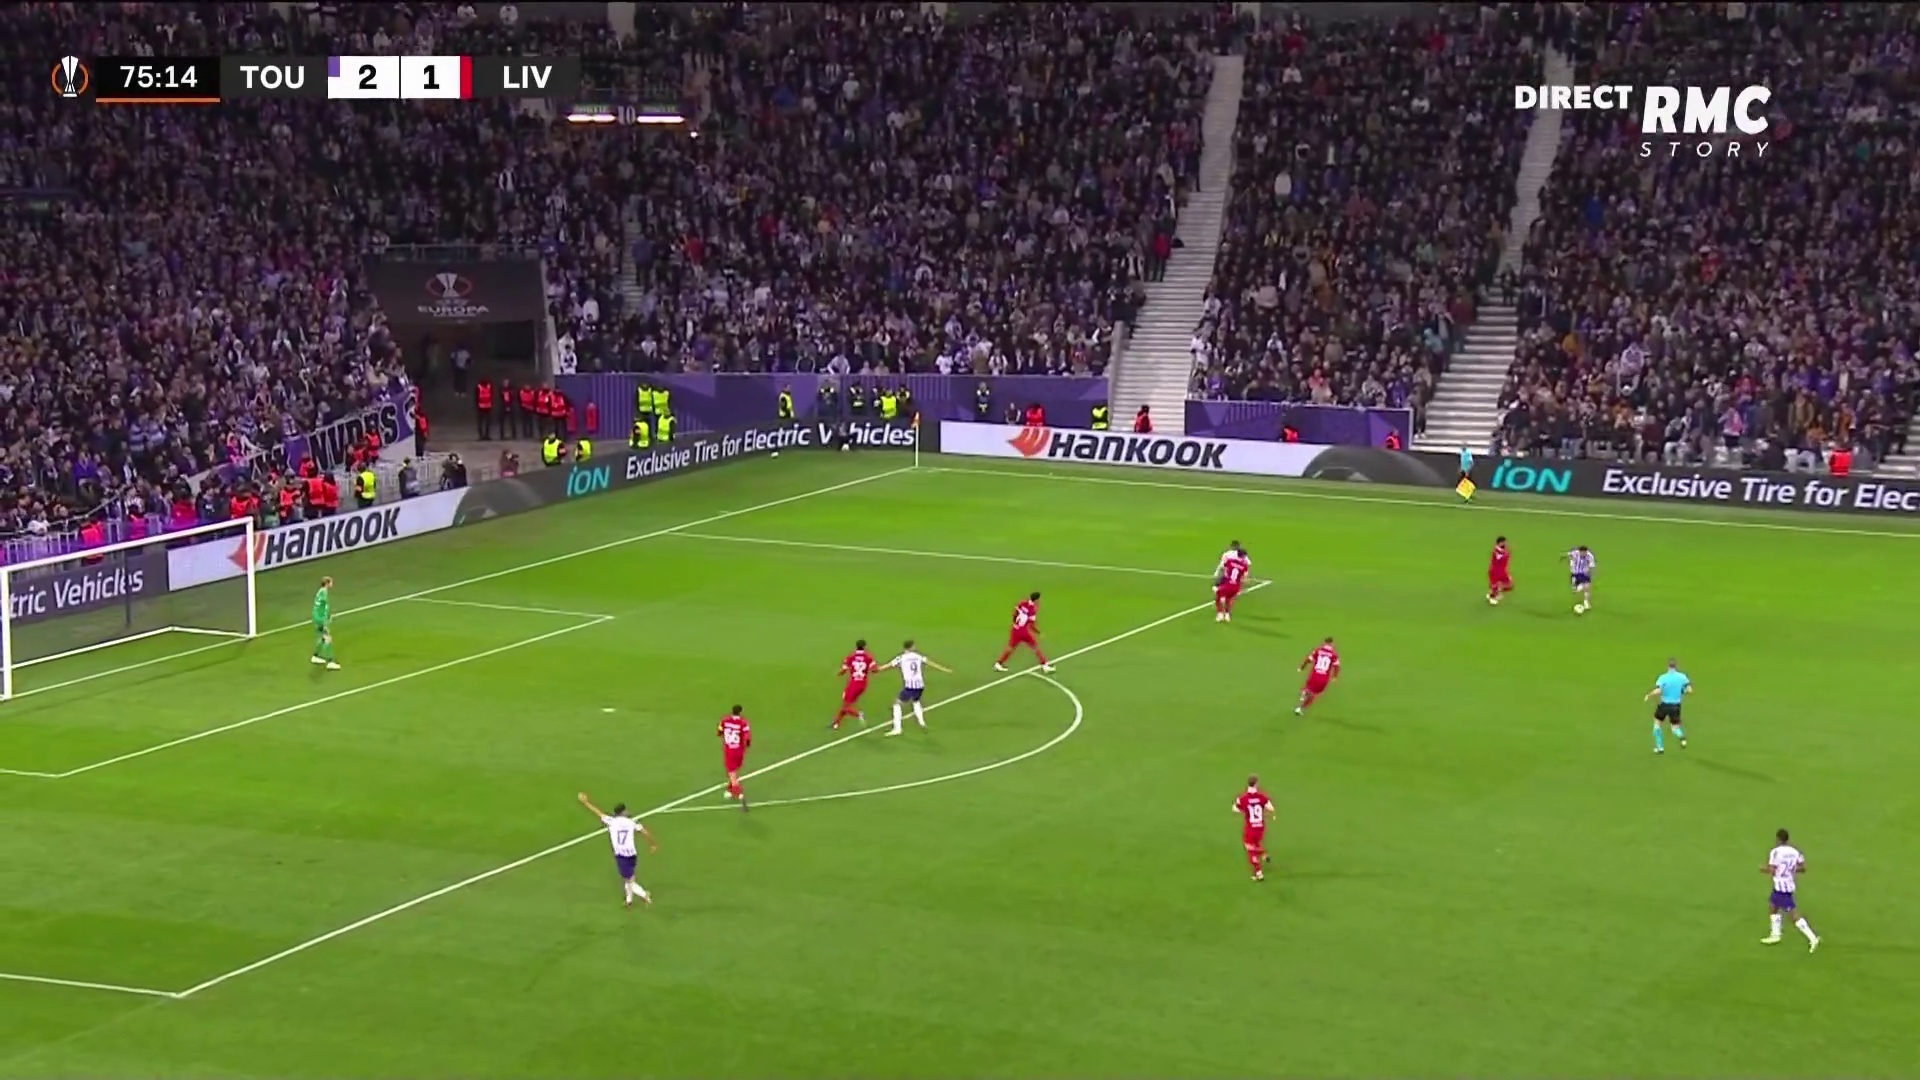 Toulouse [3] - 1 Liverpool - Frank Magri 75'